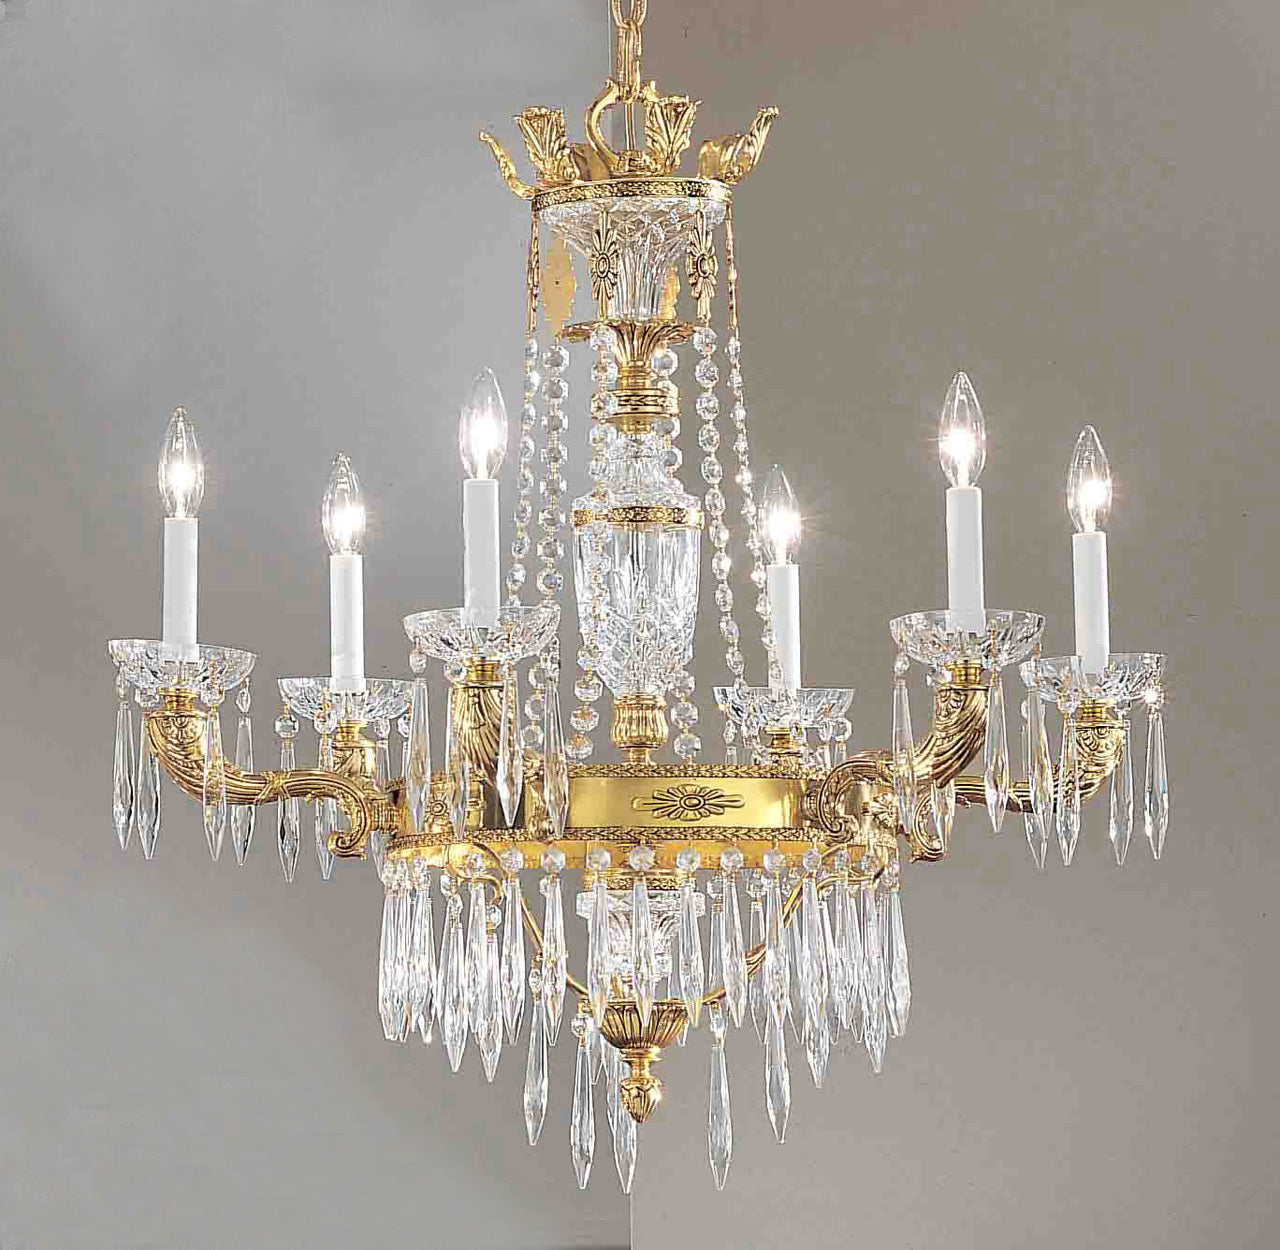 Classic Lighting 57316 AGB I Duchess Crystal Chandelier in Aged Bronze (Imported from Spain)